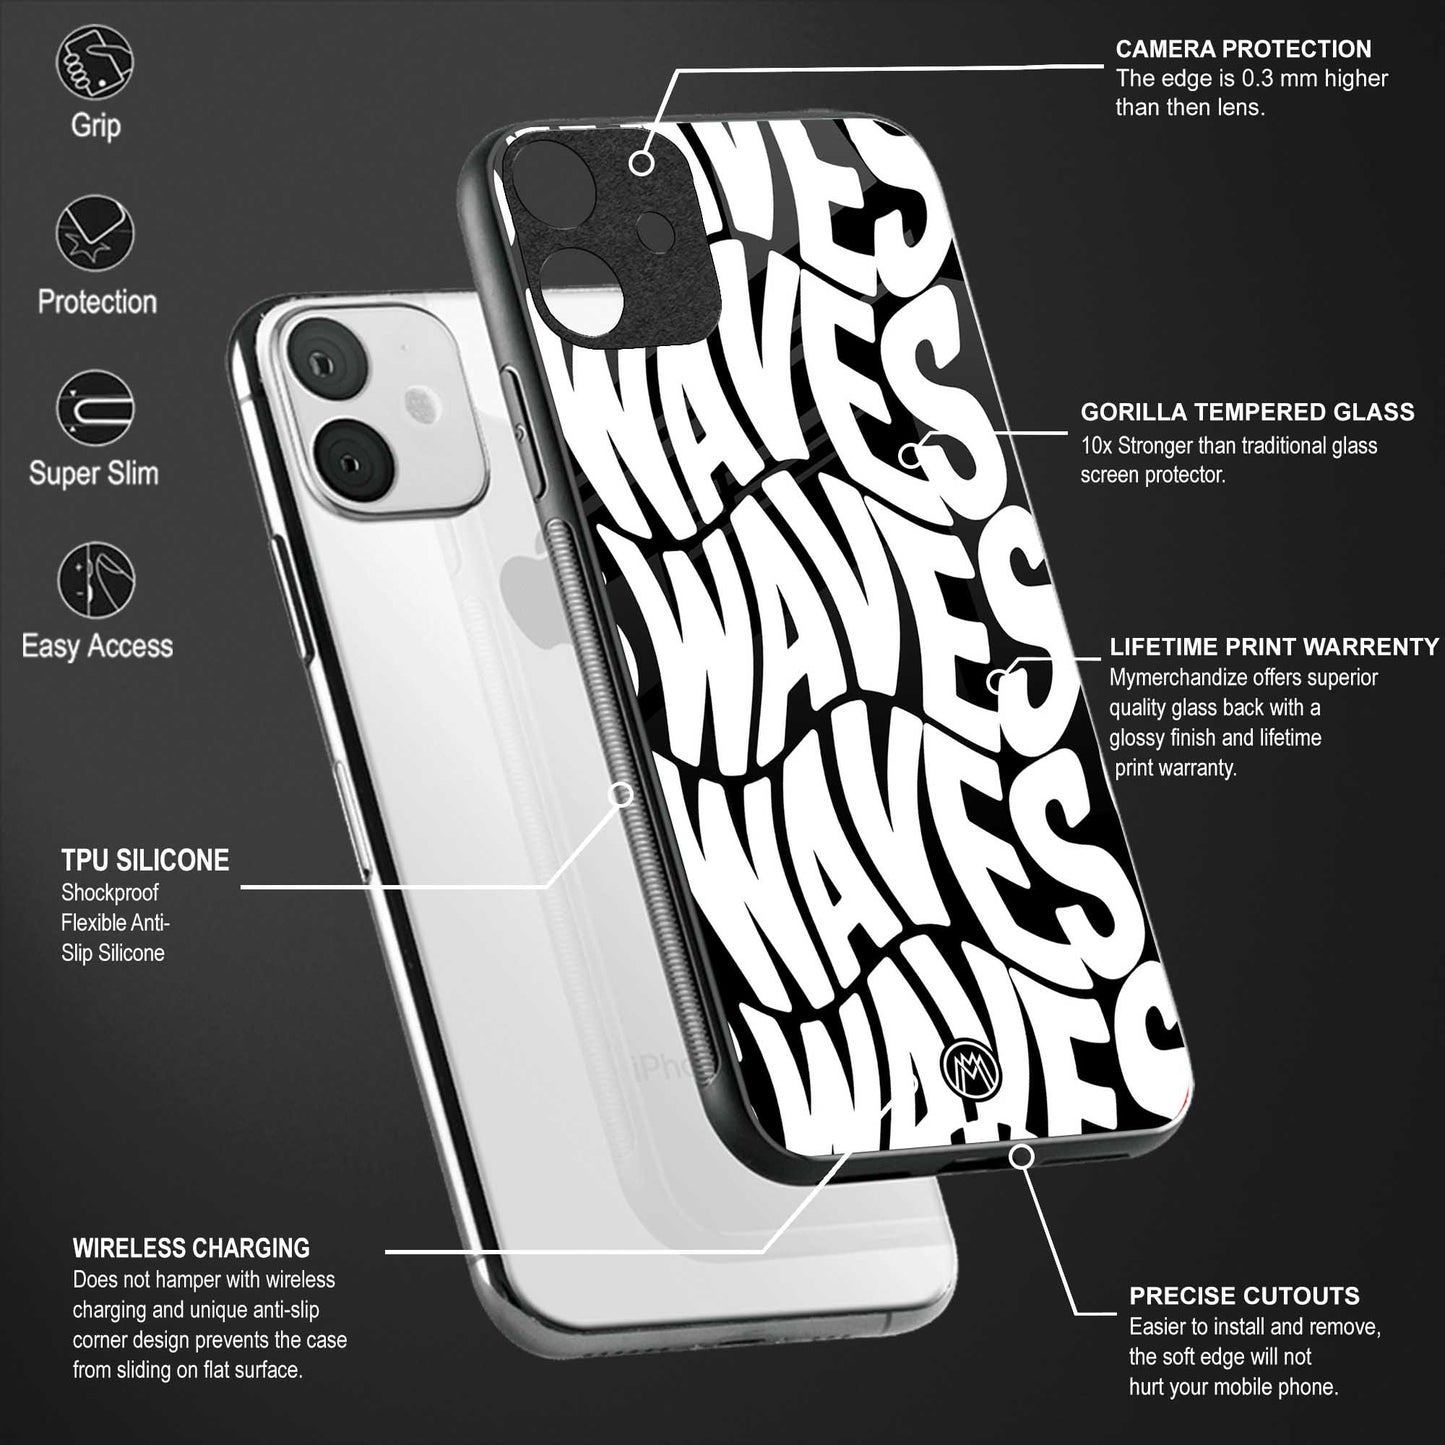 waves back phone cover | glass case for vivo y22